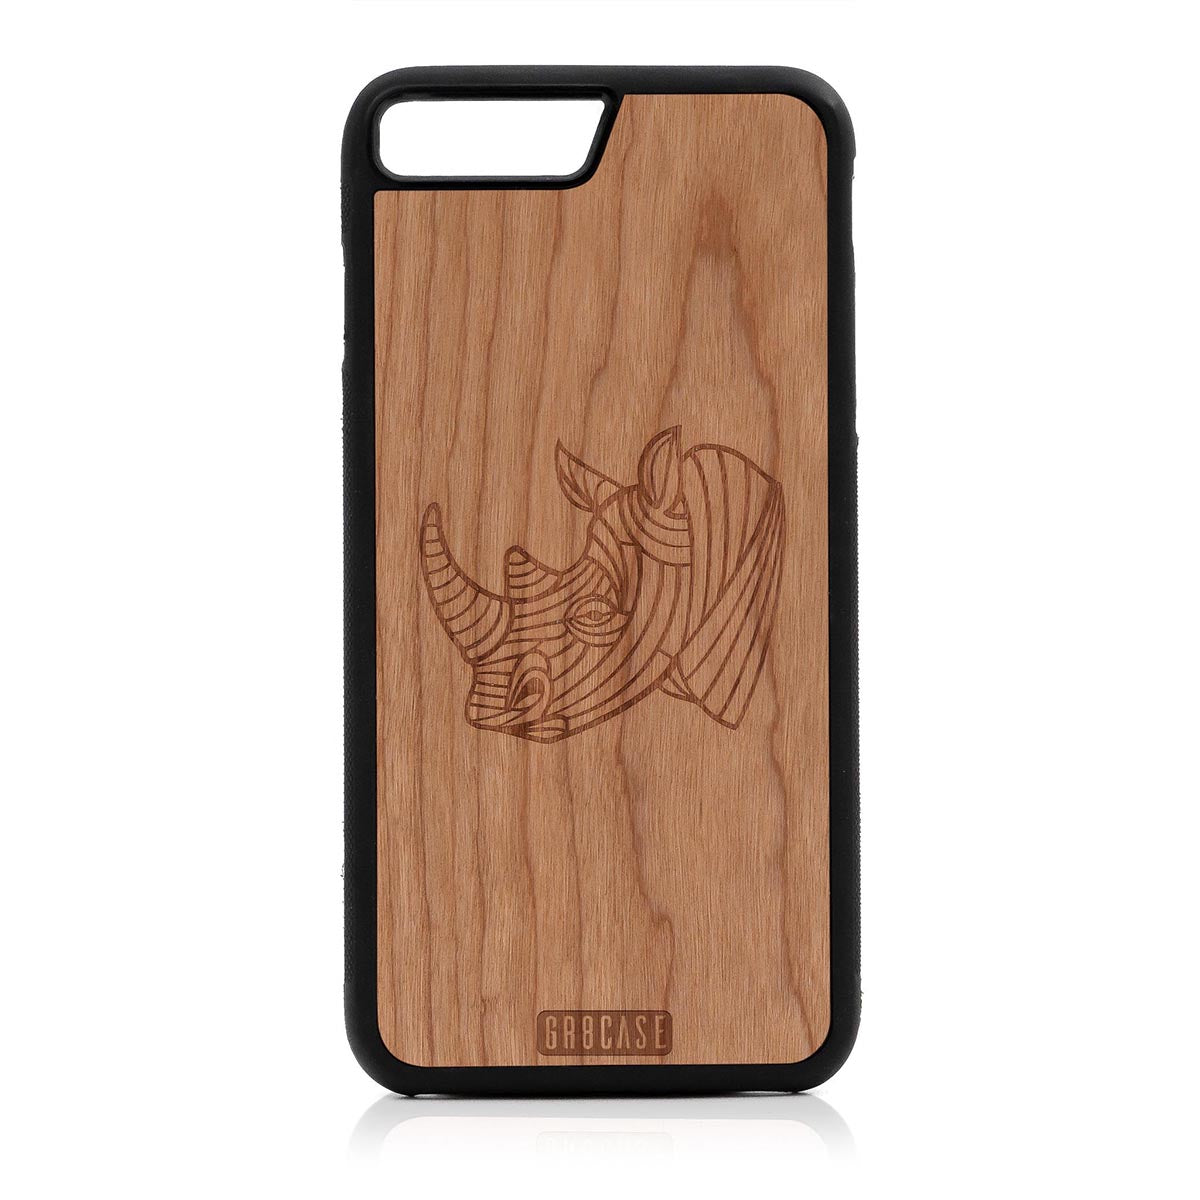 Rhino Design Wood Case For iPhone 7 Plus / 8 Plus by GR8CASE